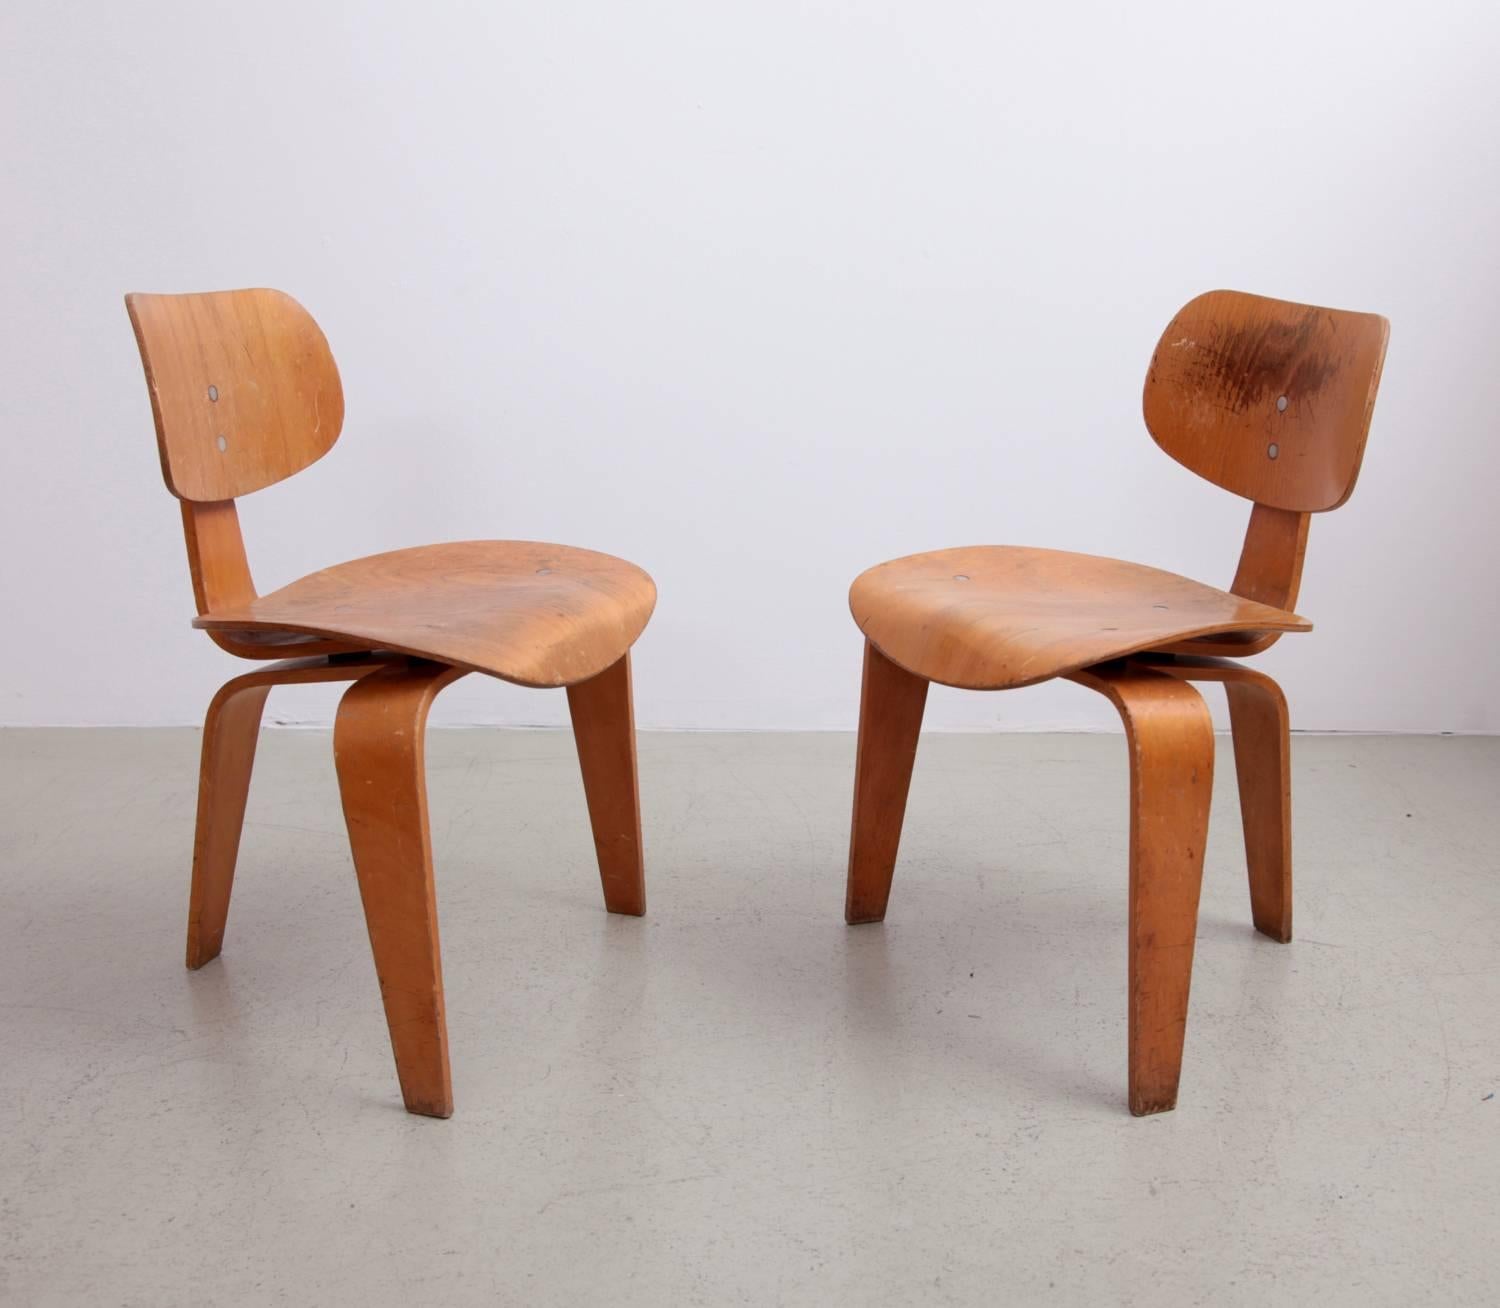 Early Egon Eiermann, plywood SE42. Designed 1949 for Wilde & Spieth. Curved beech plywood. Fully original condition.